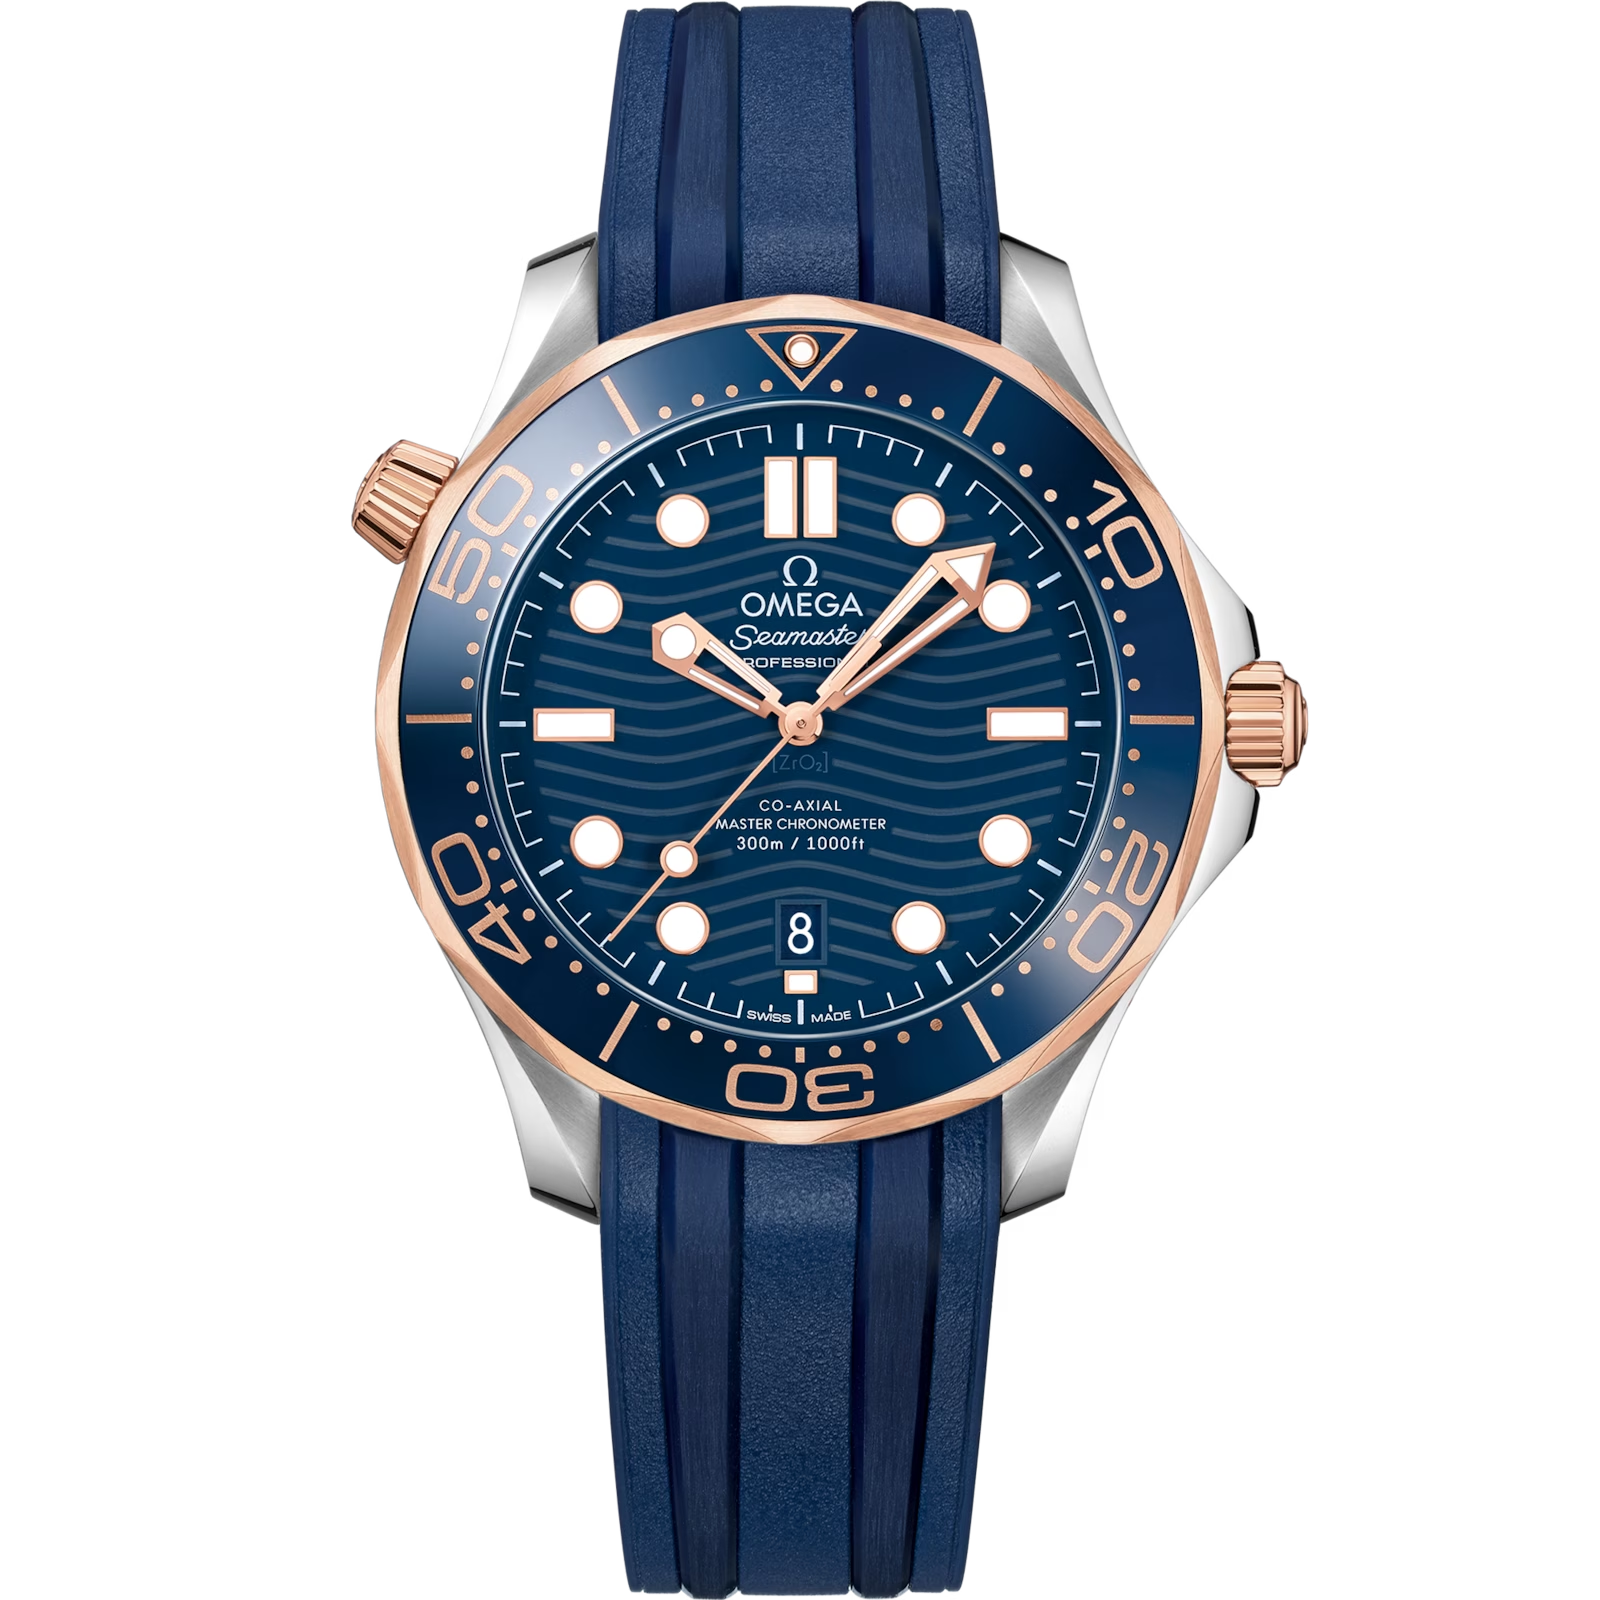 OMEGA-SEAMASTER DIVER 300M CO‑AXIAL MASTER CHRONOMETER 42 MM 210.22.42.20.03.002